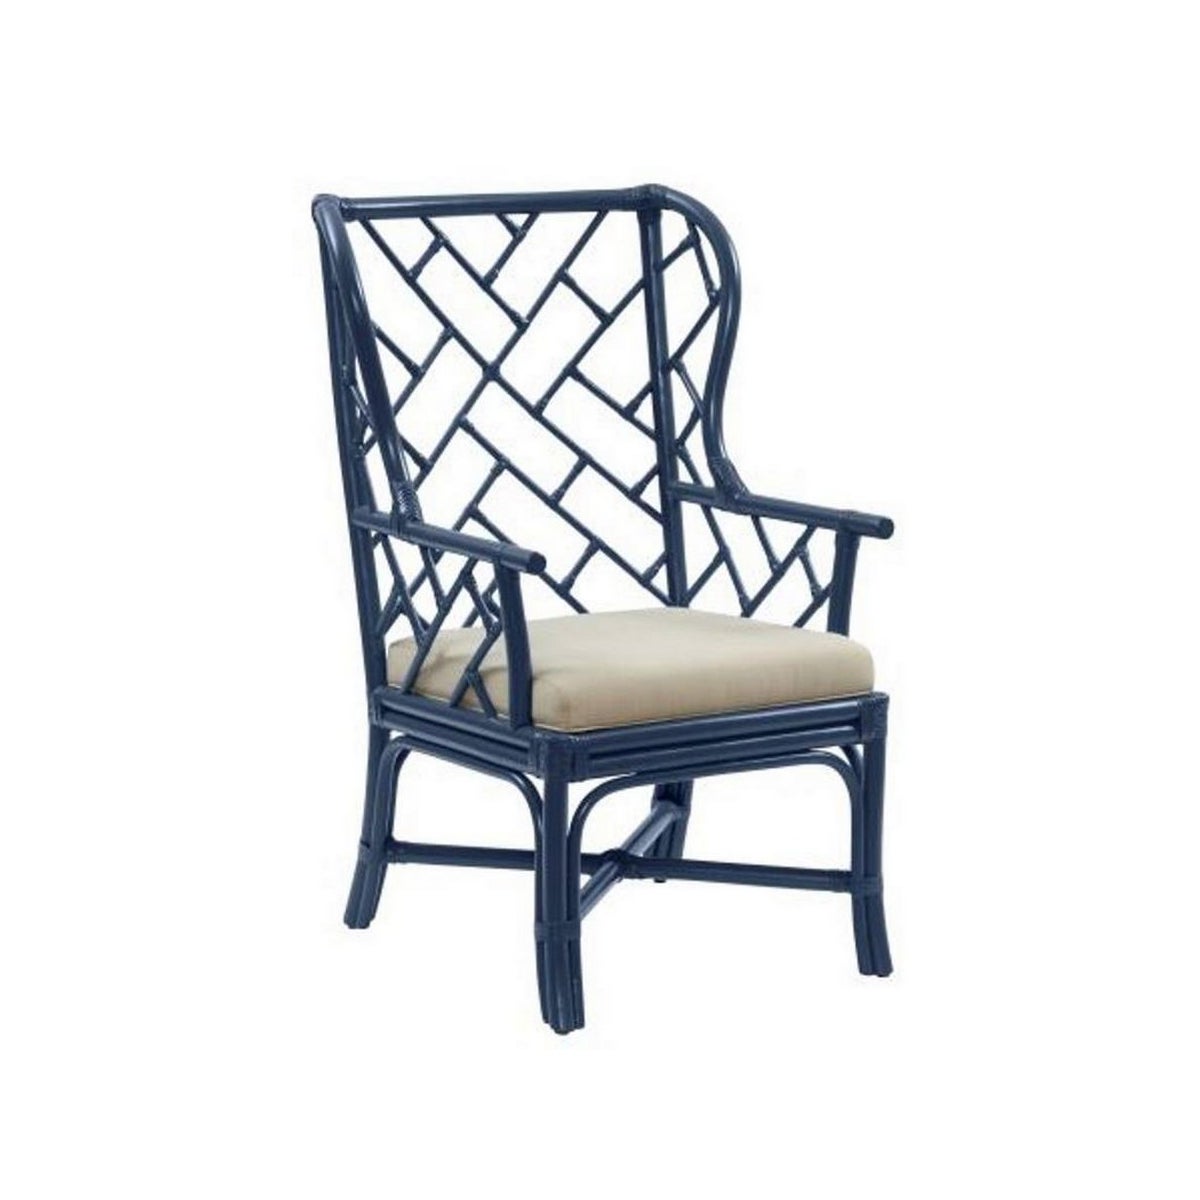 Palm Beach Chippendale Wing Chair Unpainted - "Select Your Color" Rattan Frame with Leather Wraps